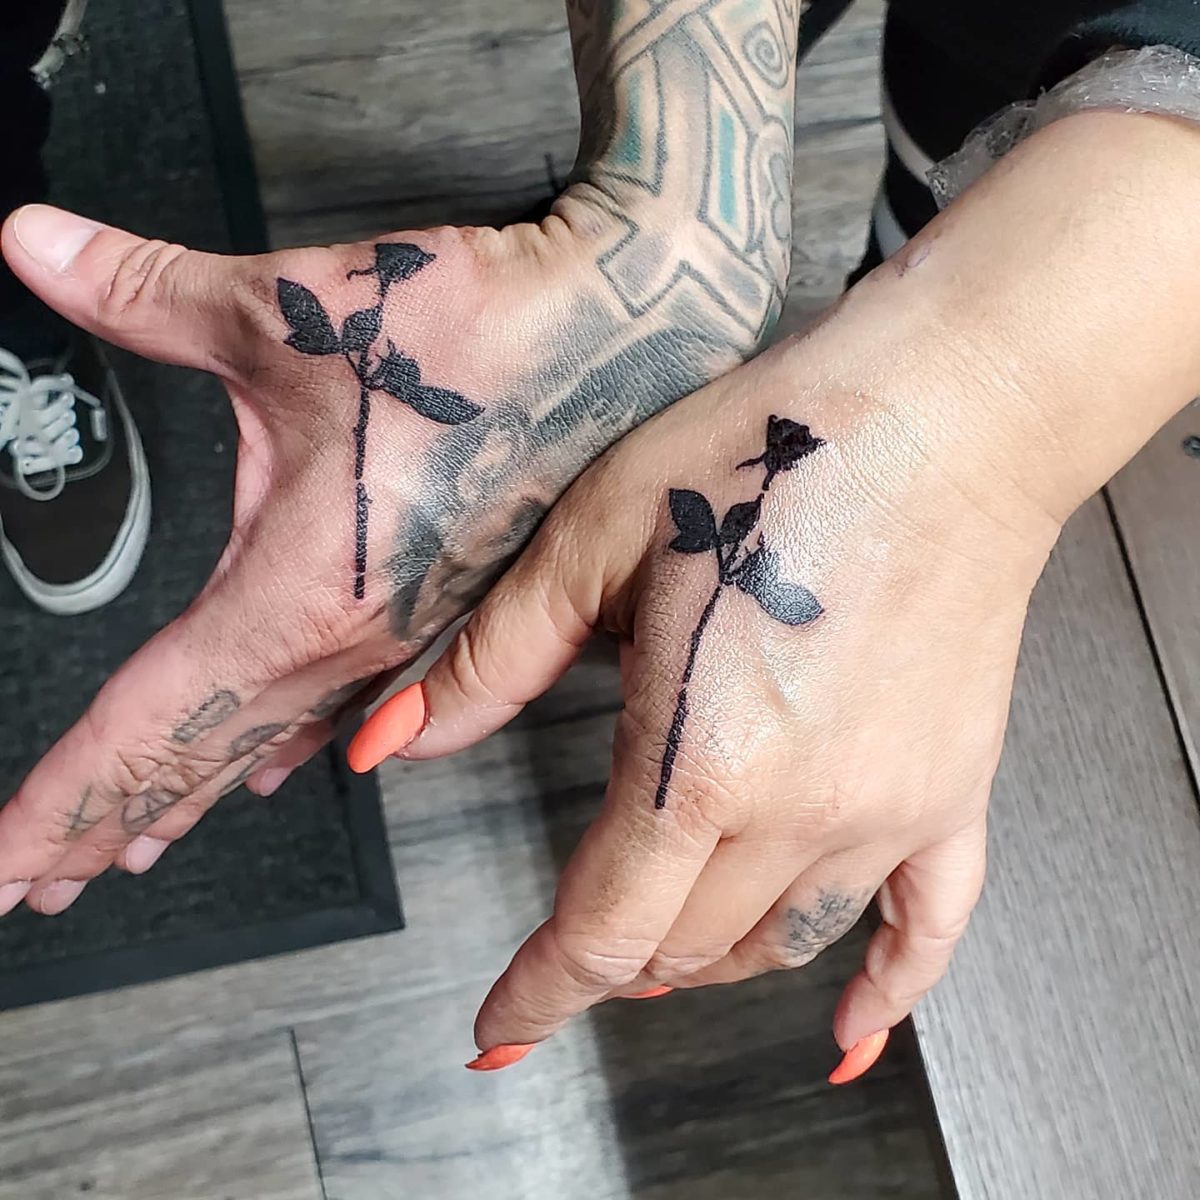 25 fun brother and sister tattoos that visualize an unbreakable bond | express the love in fun ways with these brother and sister tattoos.